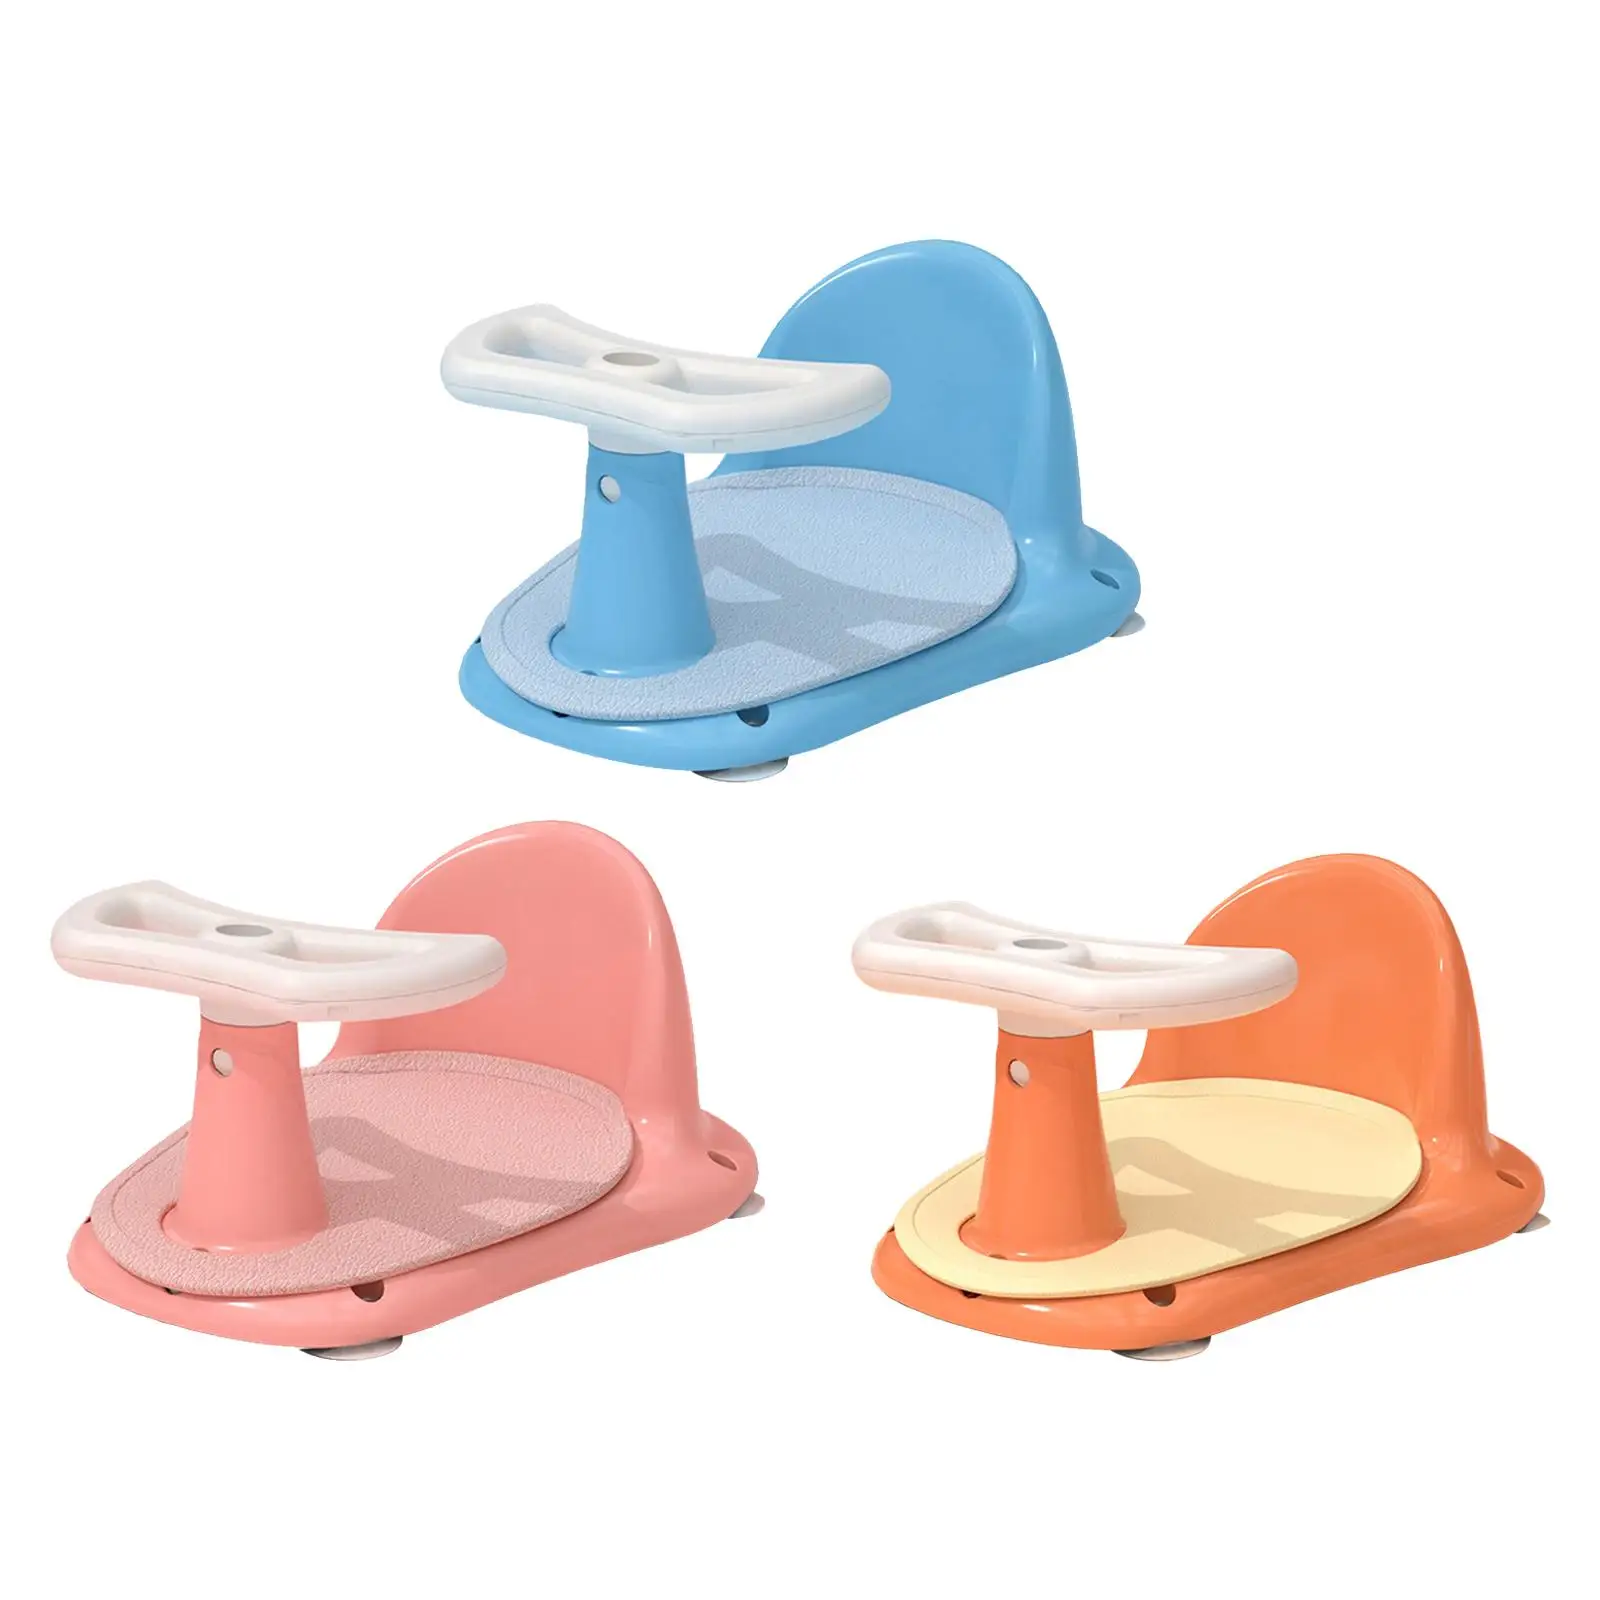 Cute Bathtub Seat Tub Sitting up Suction Steering Wheel Seat Support for 6-18 Months